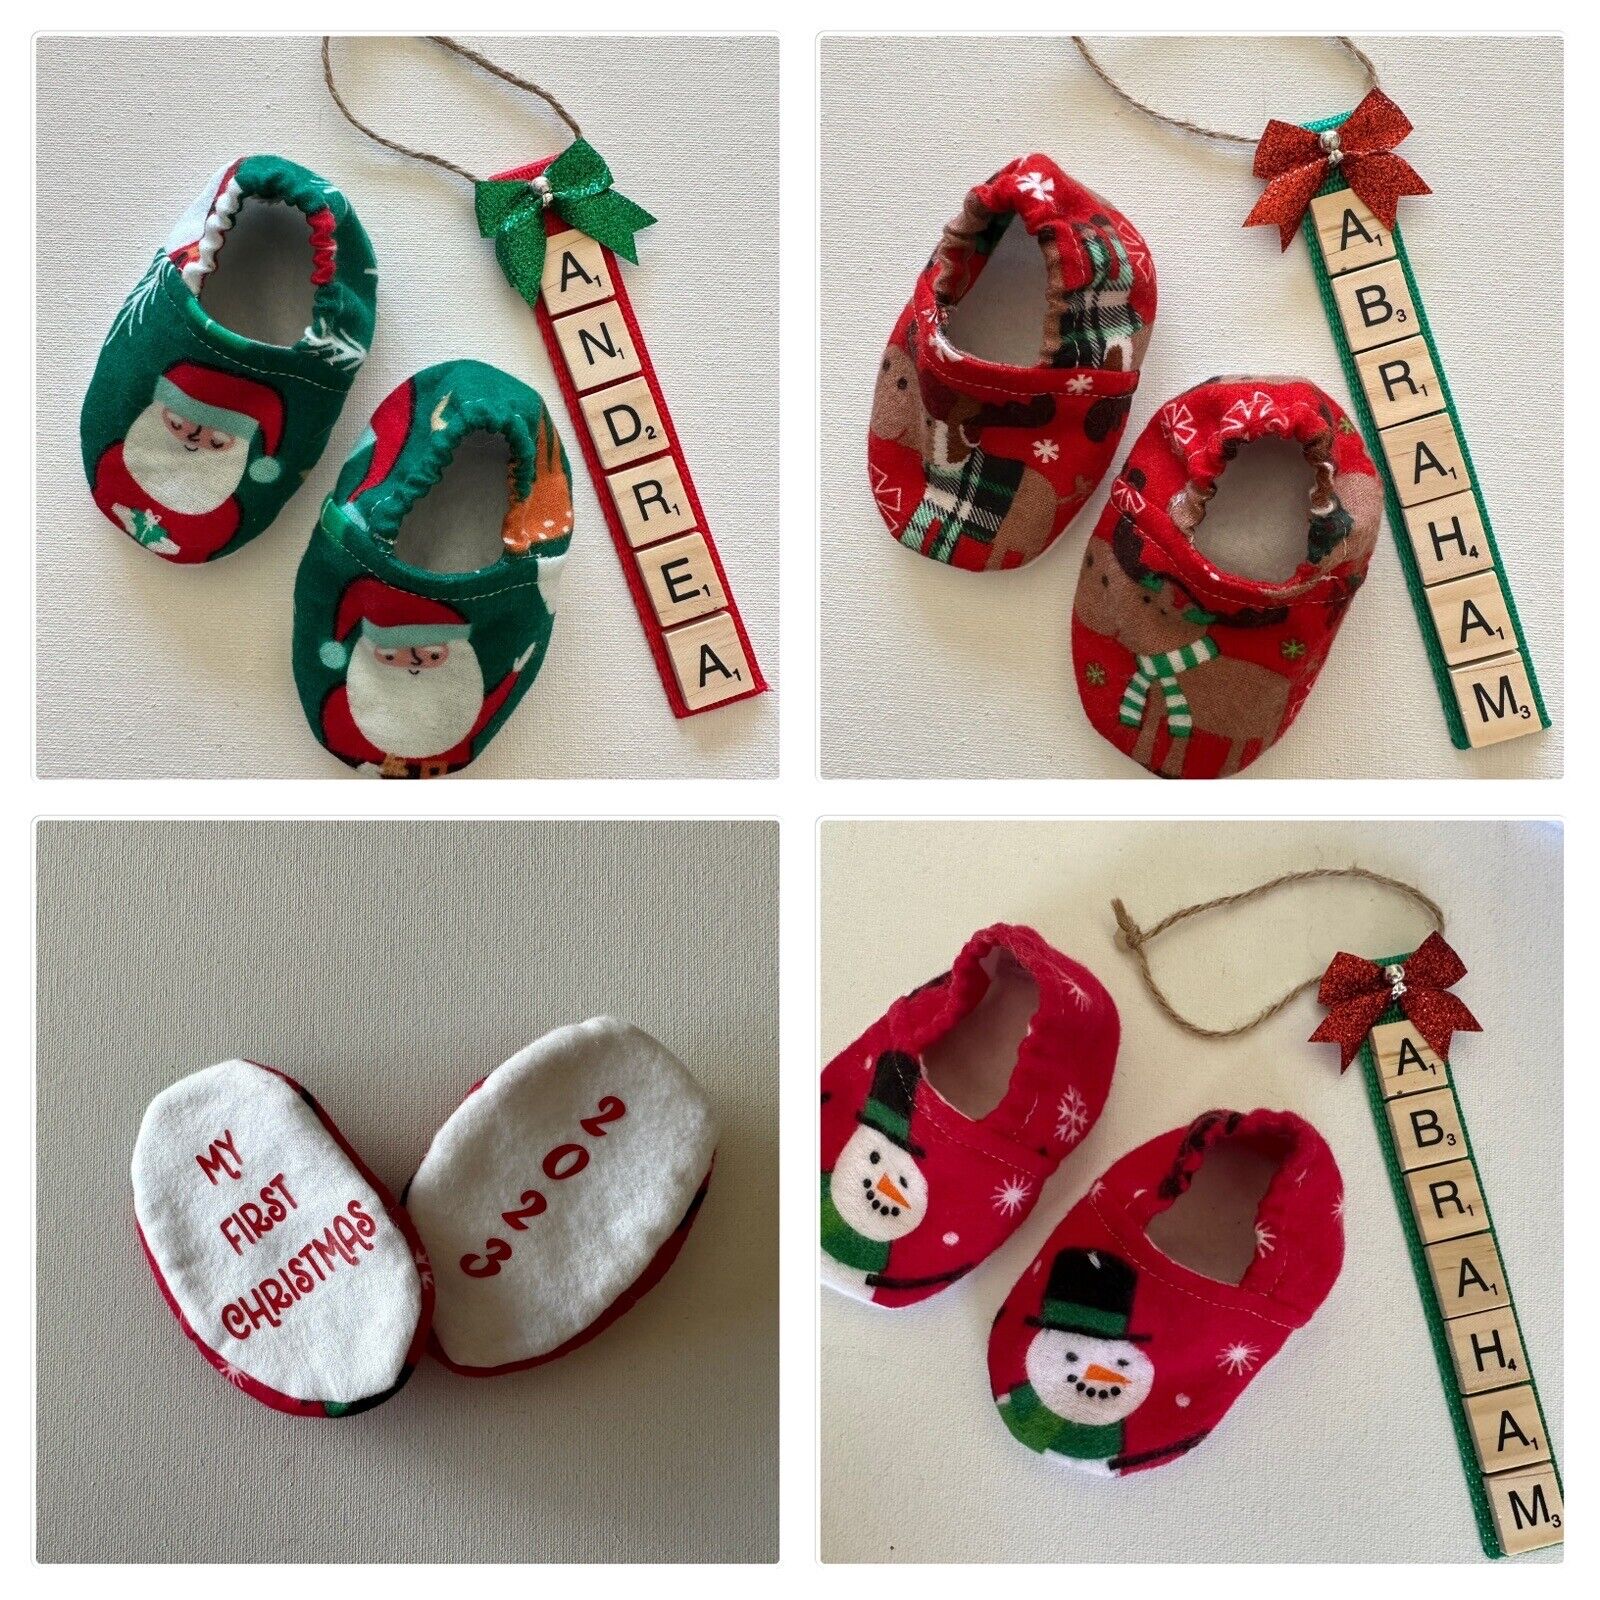 Baby's First Christmas shoes and a personalized Name SCRABBLE TILE ORNAMENT